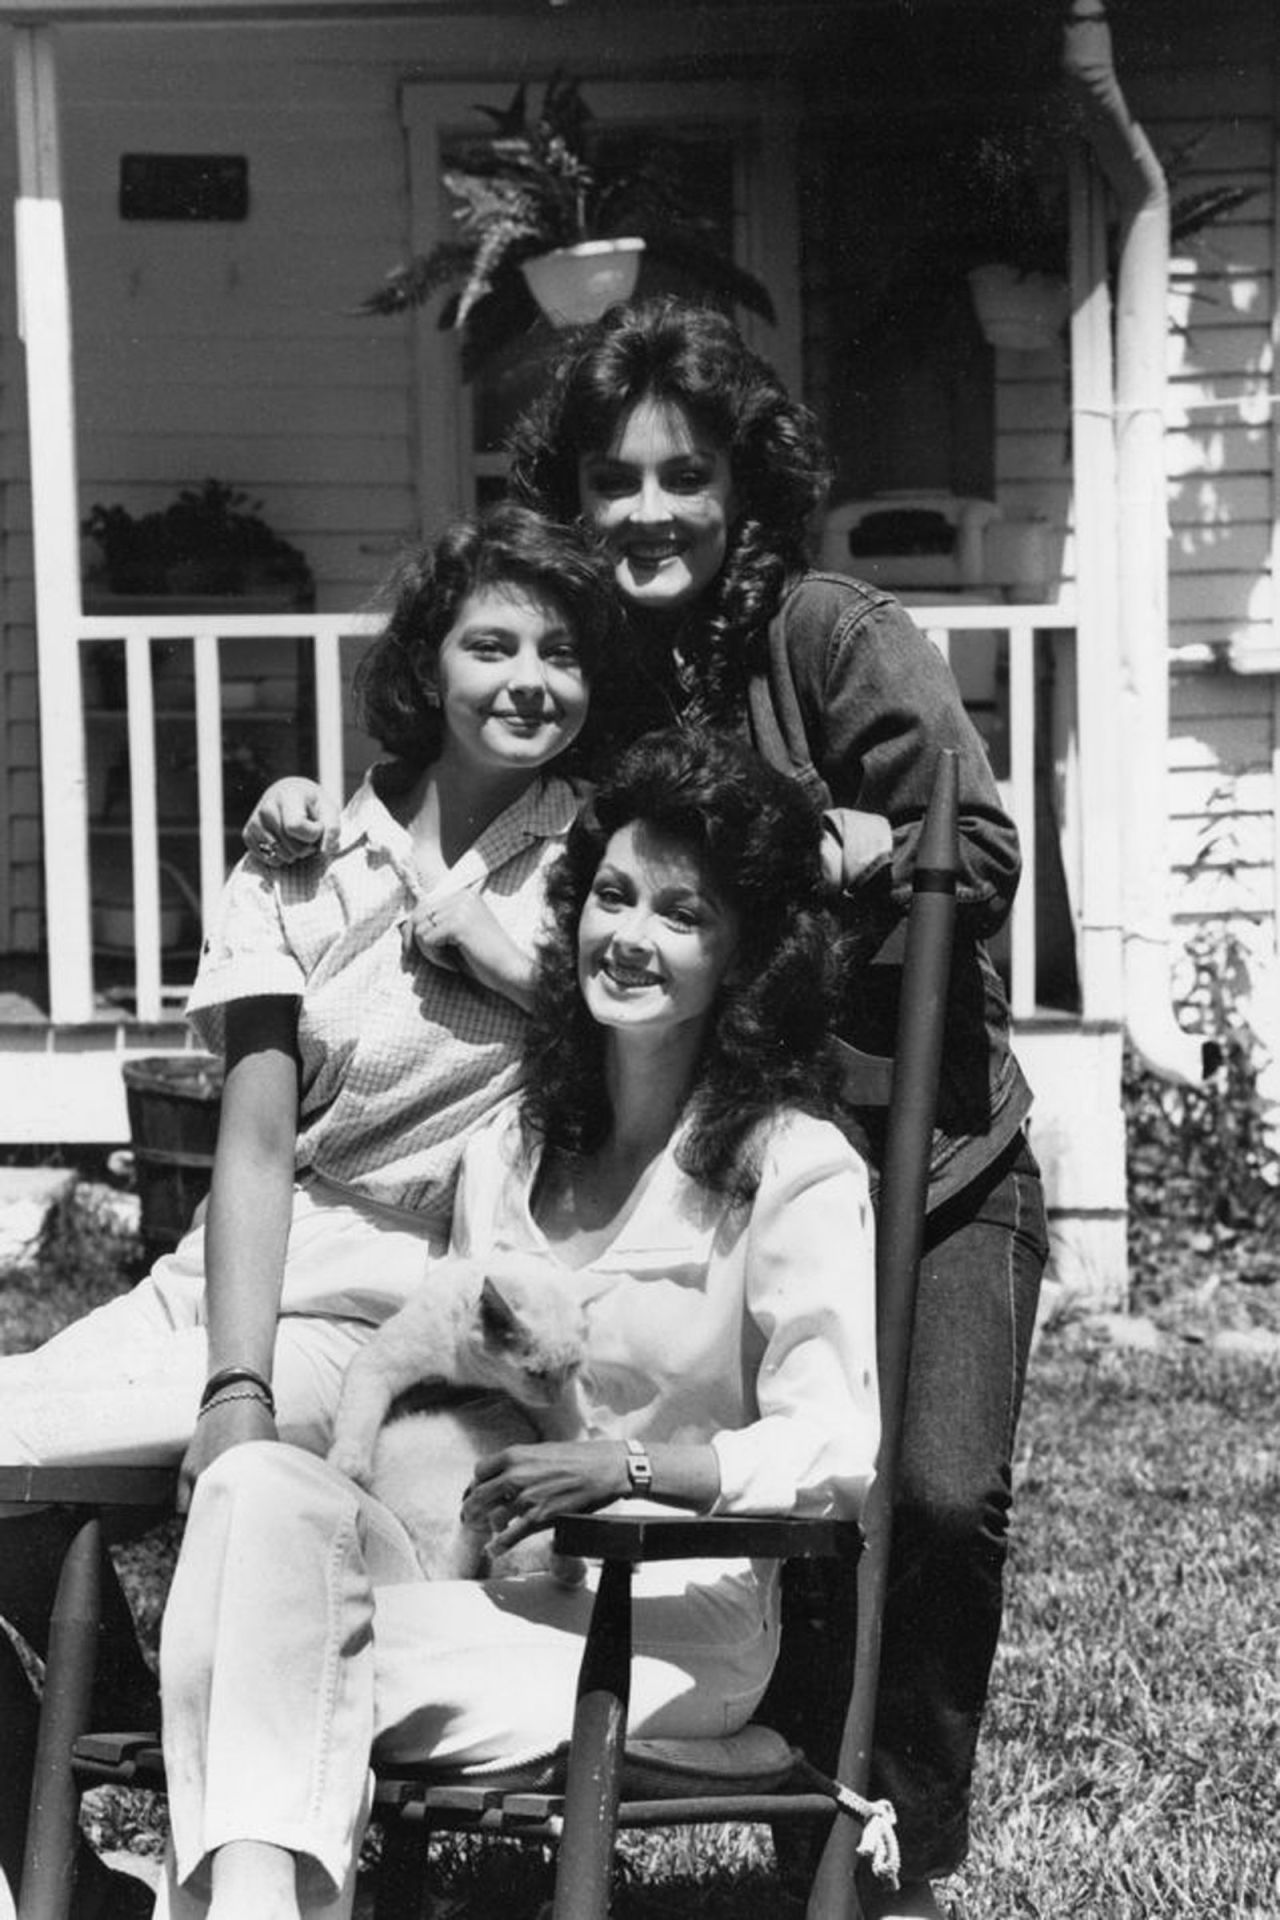 Judd poses with her daughters Ashley Judd, left, and Wynonna Judd in 1984.